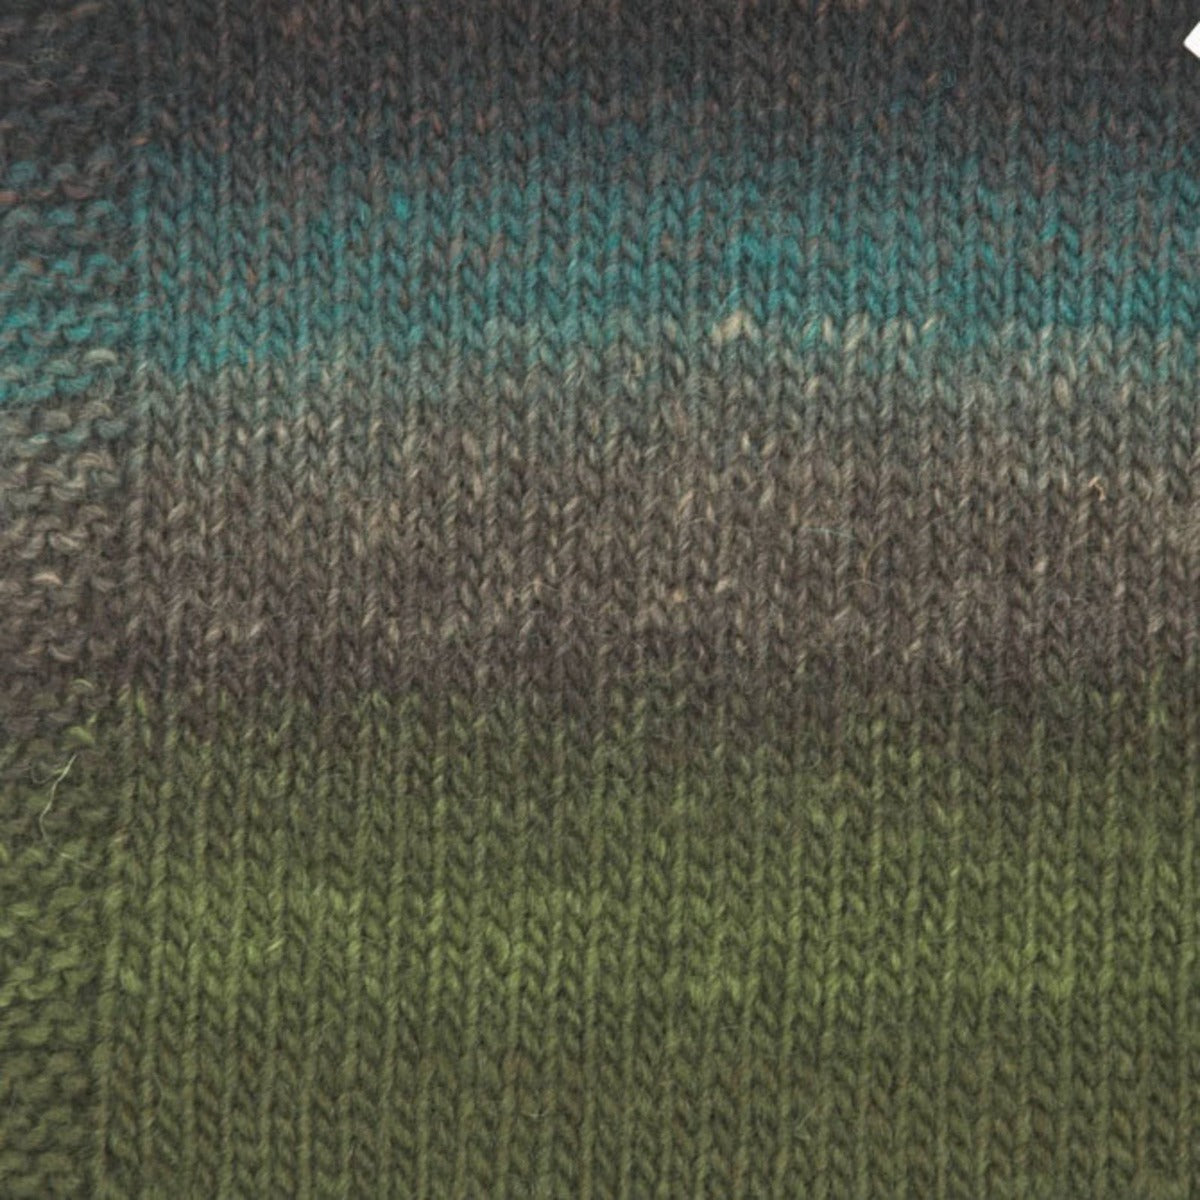 A photo of a green, gray, and blue yarn sample